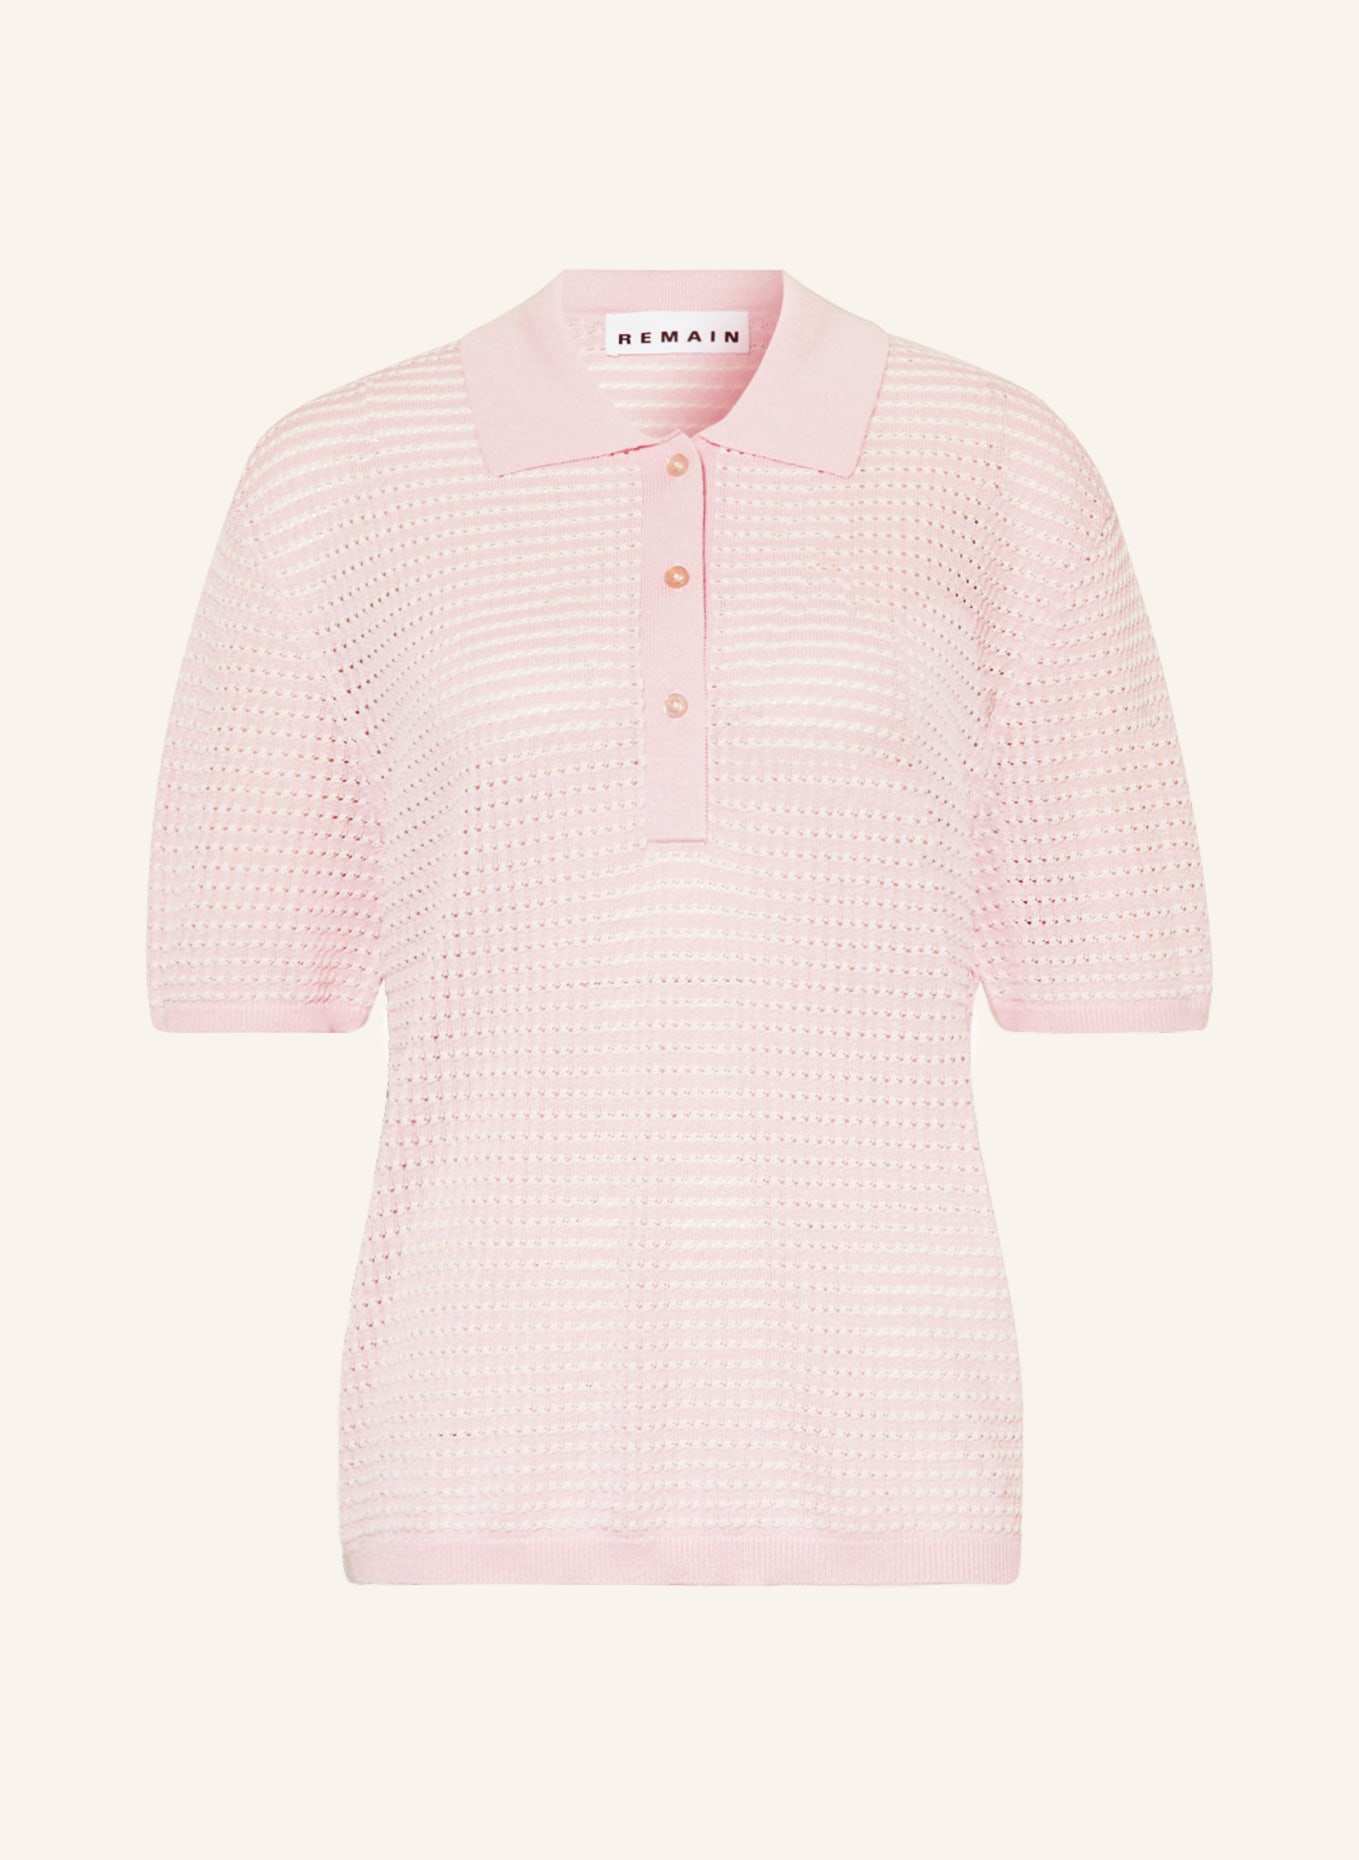 REMAIN Knitted polo shirt, Color: PINK/ WHITE (Image 1)